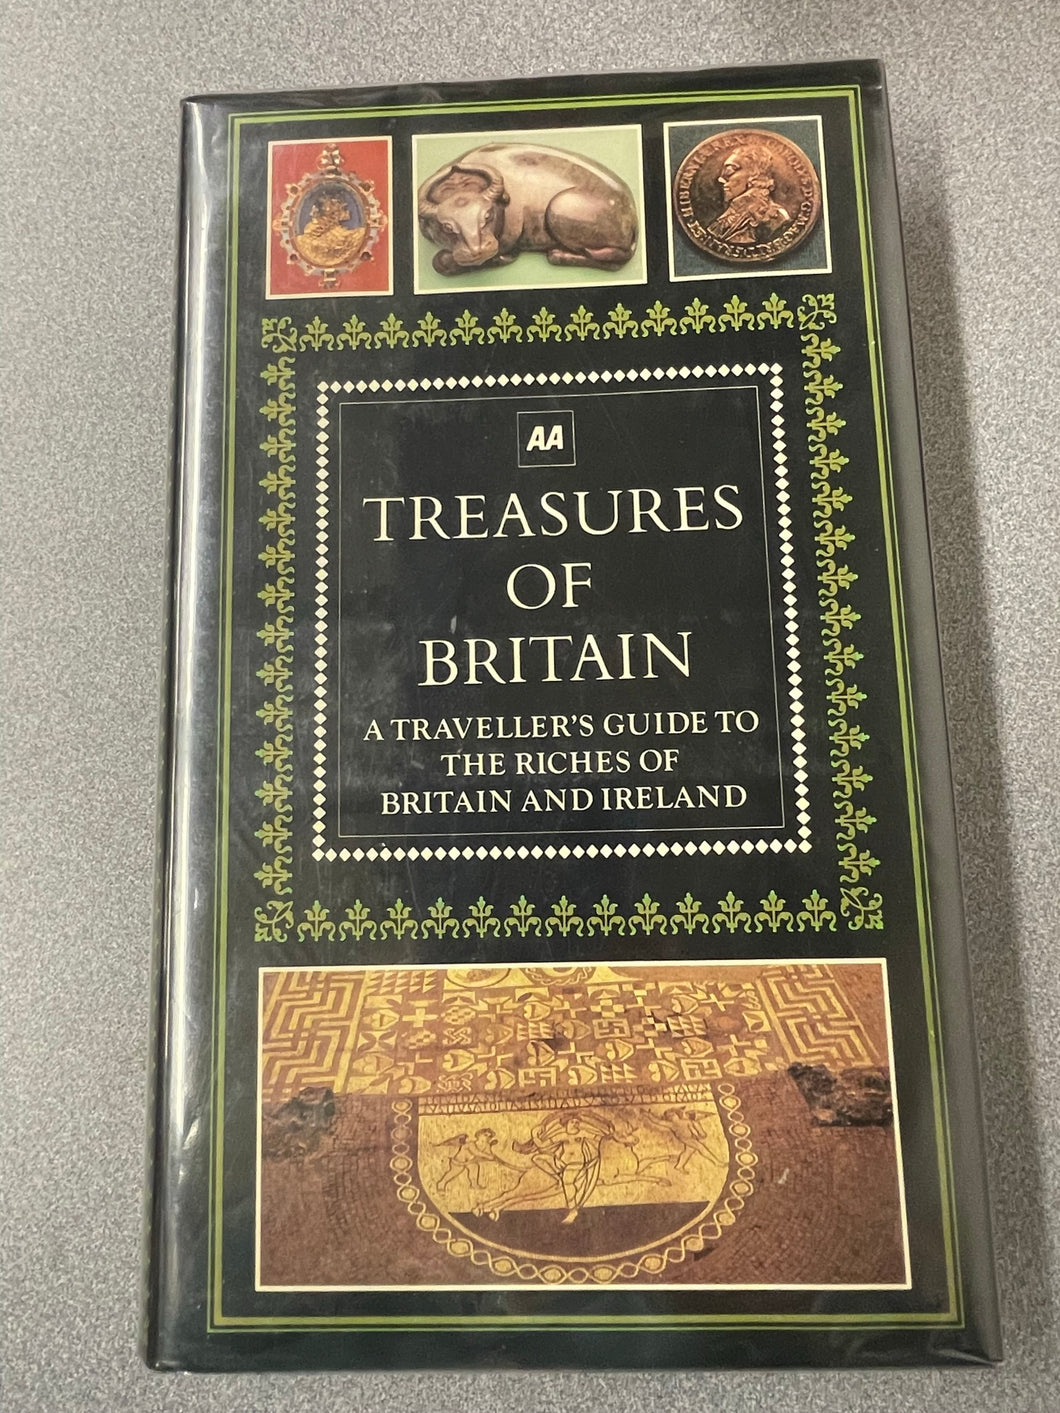 Treasures of Britain: a Traveler's Guide to the Riches of Britain and Ireland, [1984] TR 11/22